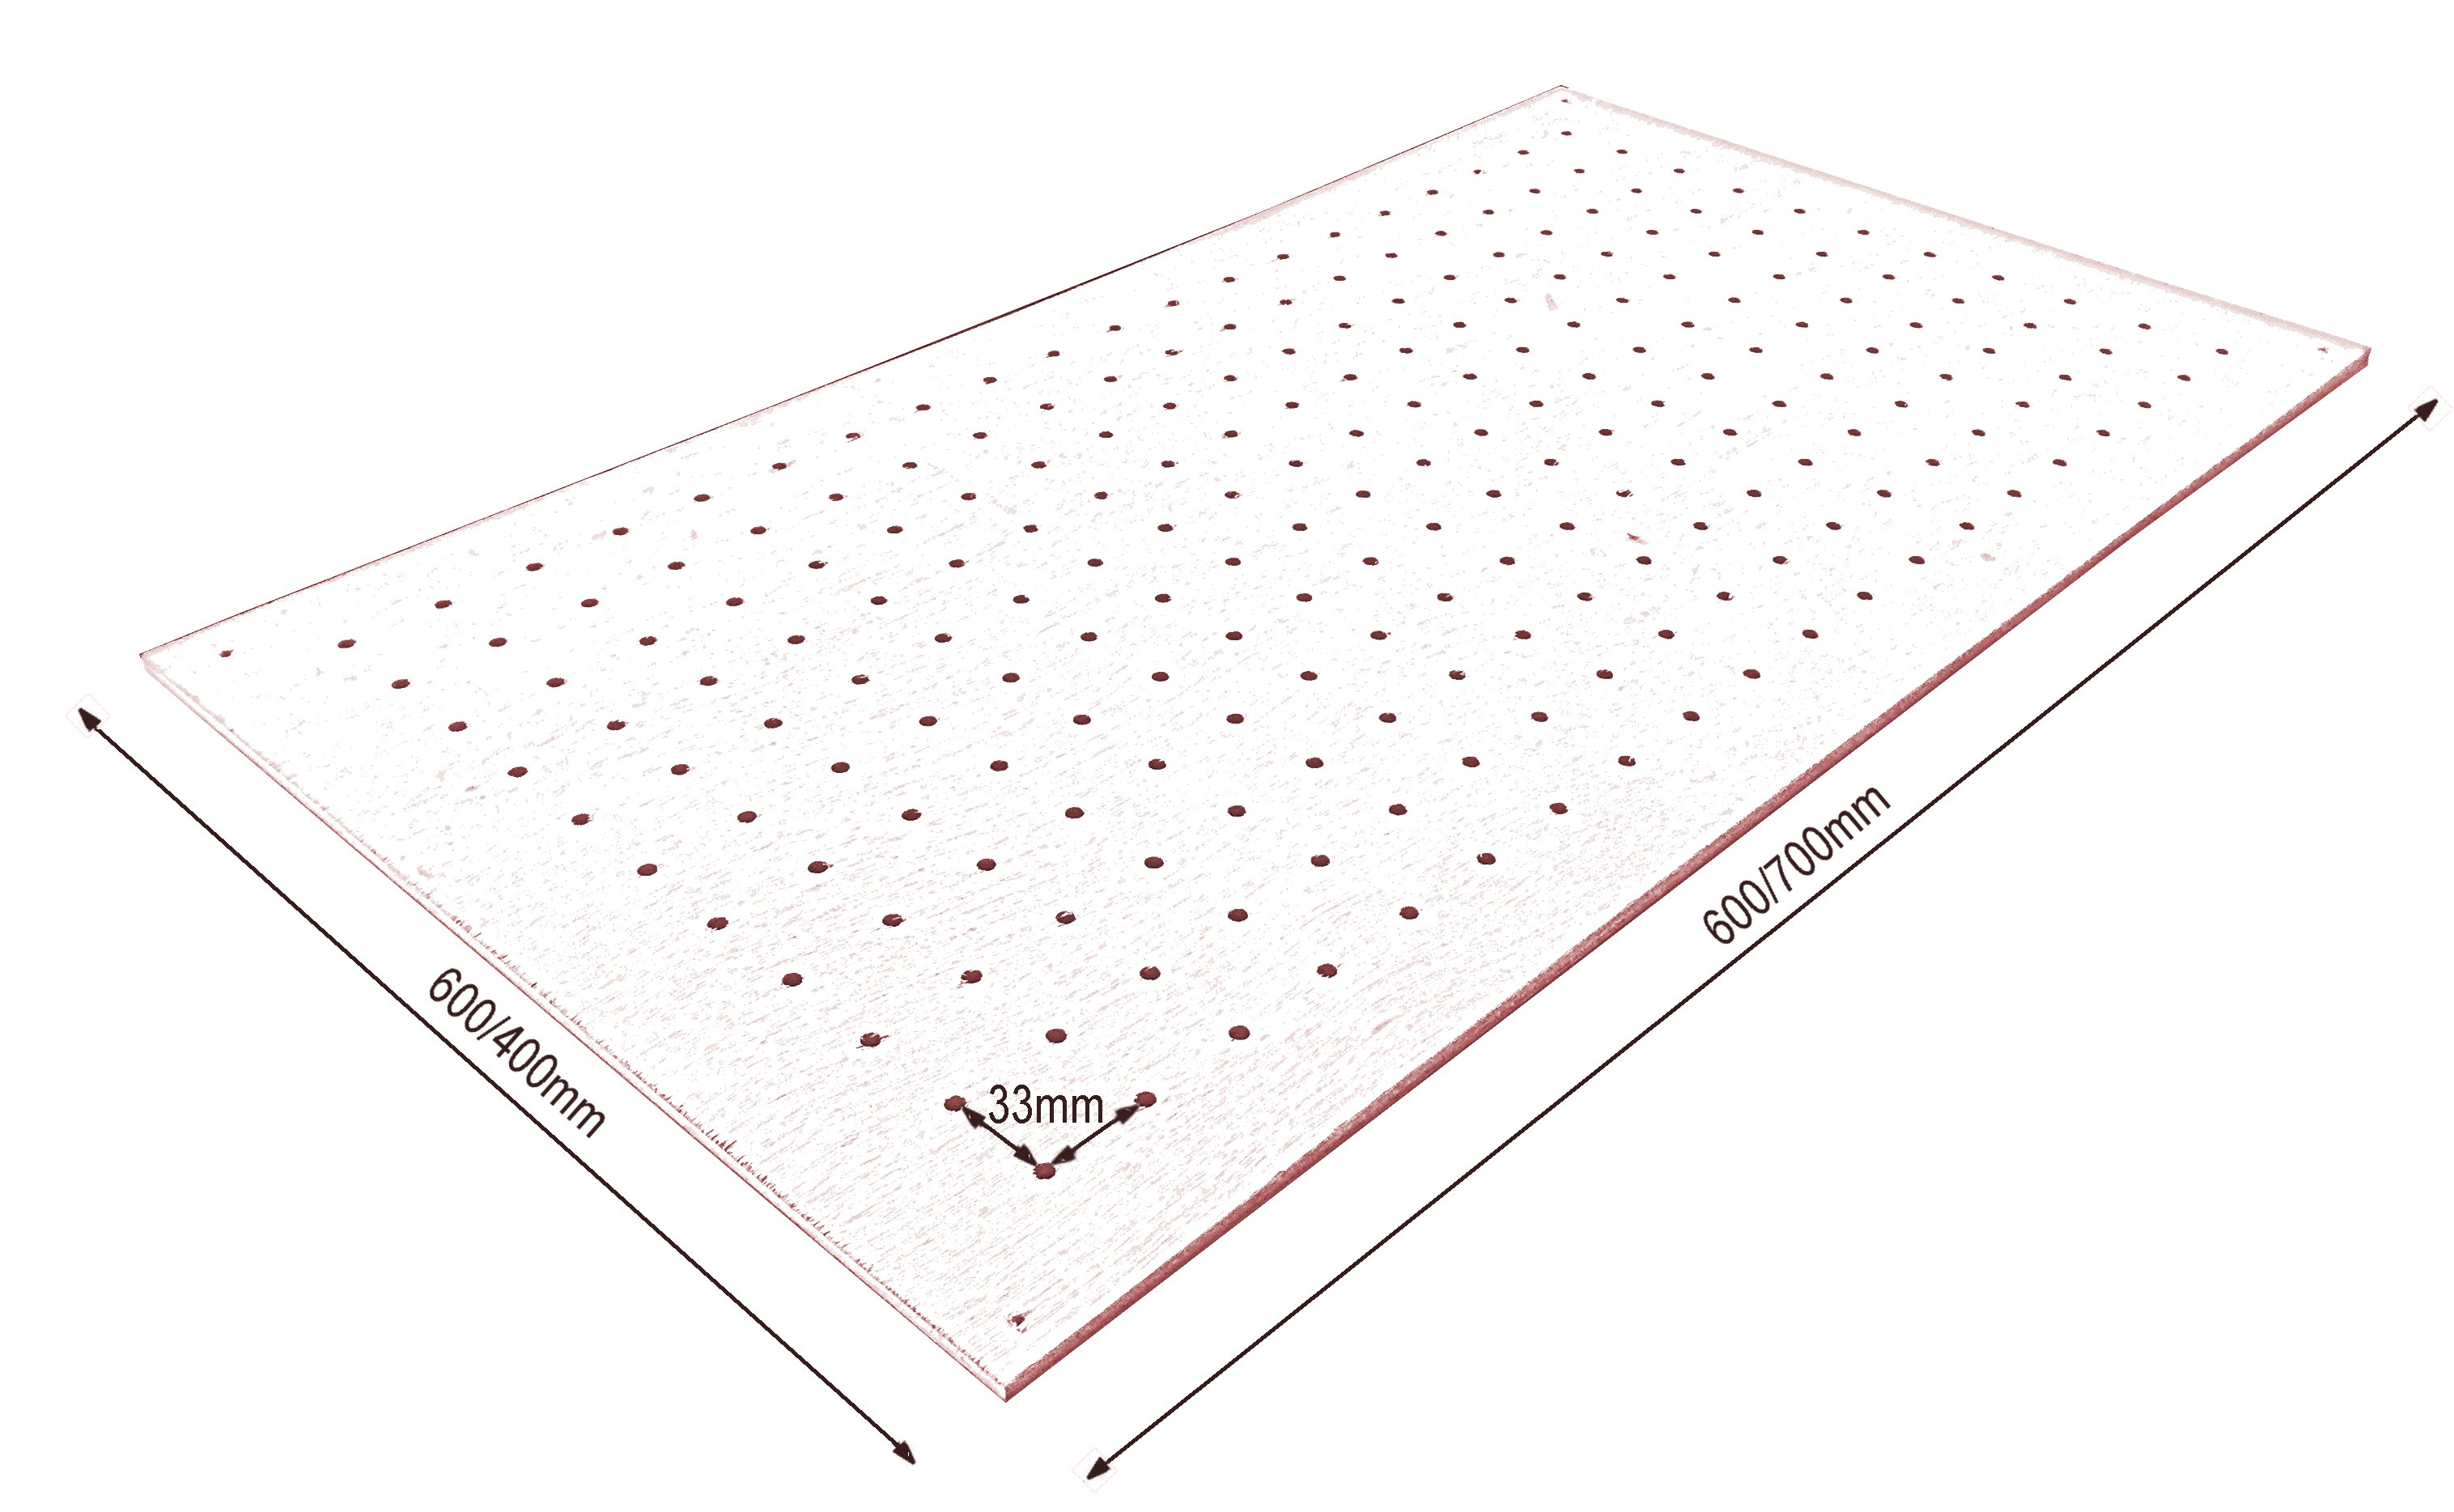 Sketch perforated plate